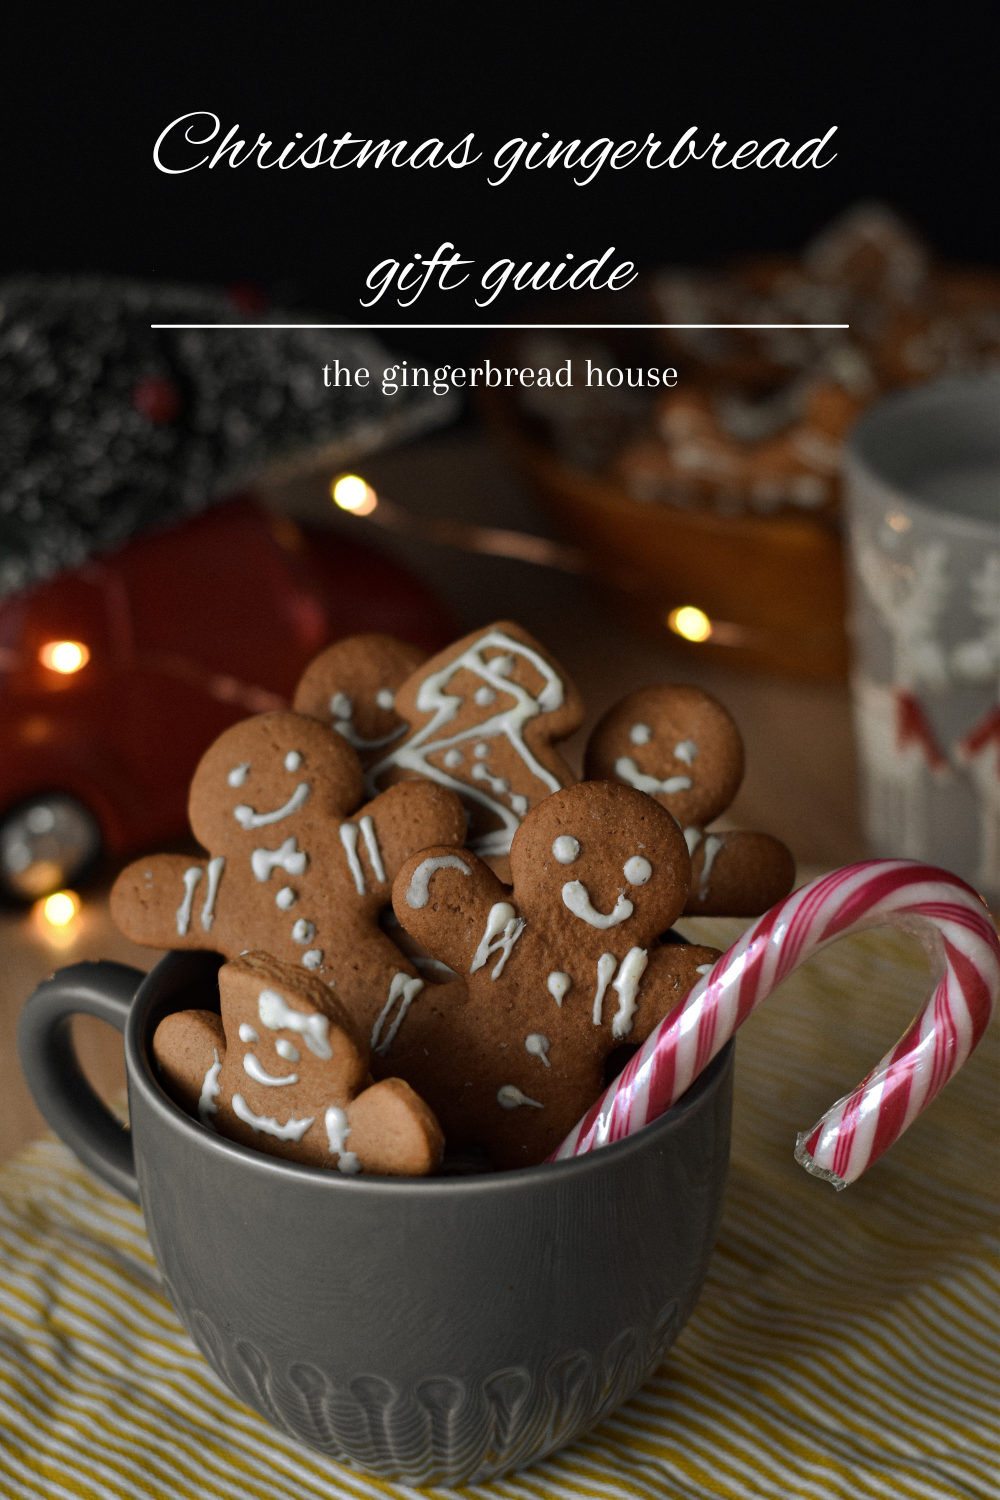 Gift Guide for Holiday Gingerbread Treats